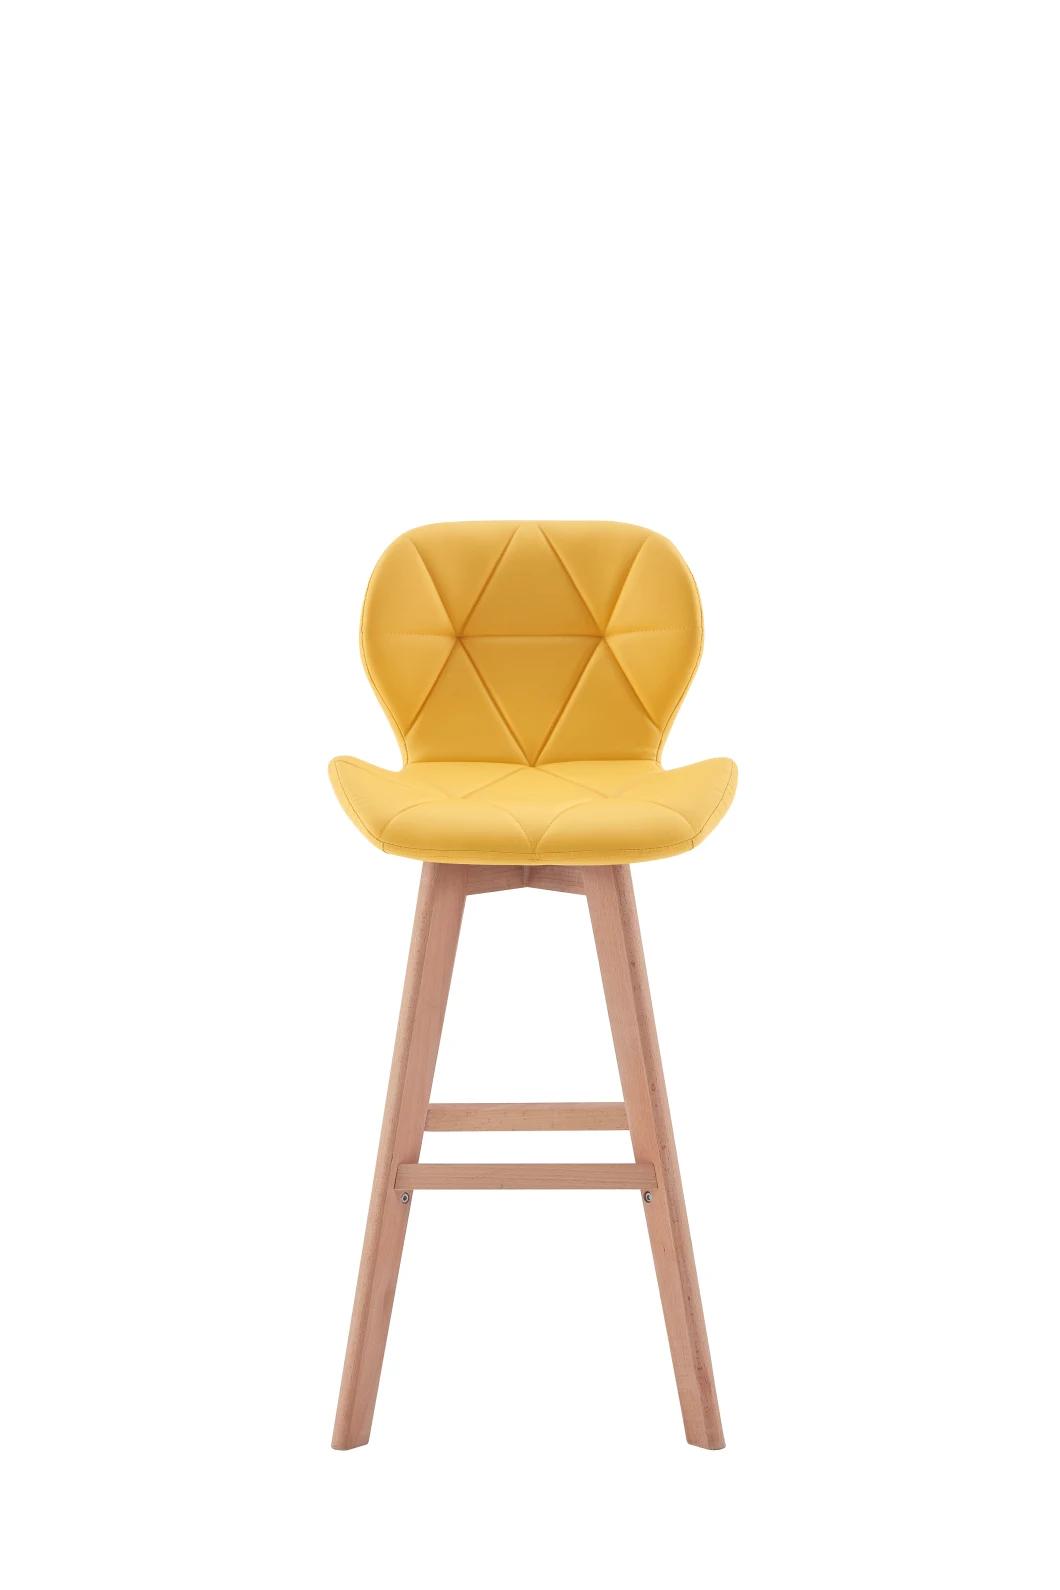 Yellow PU Leather Chair Dining Nordic MID Century Dining Chair Modern Stools